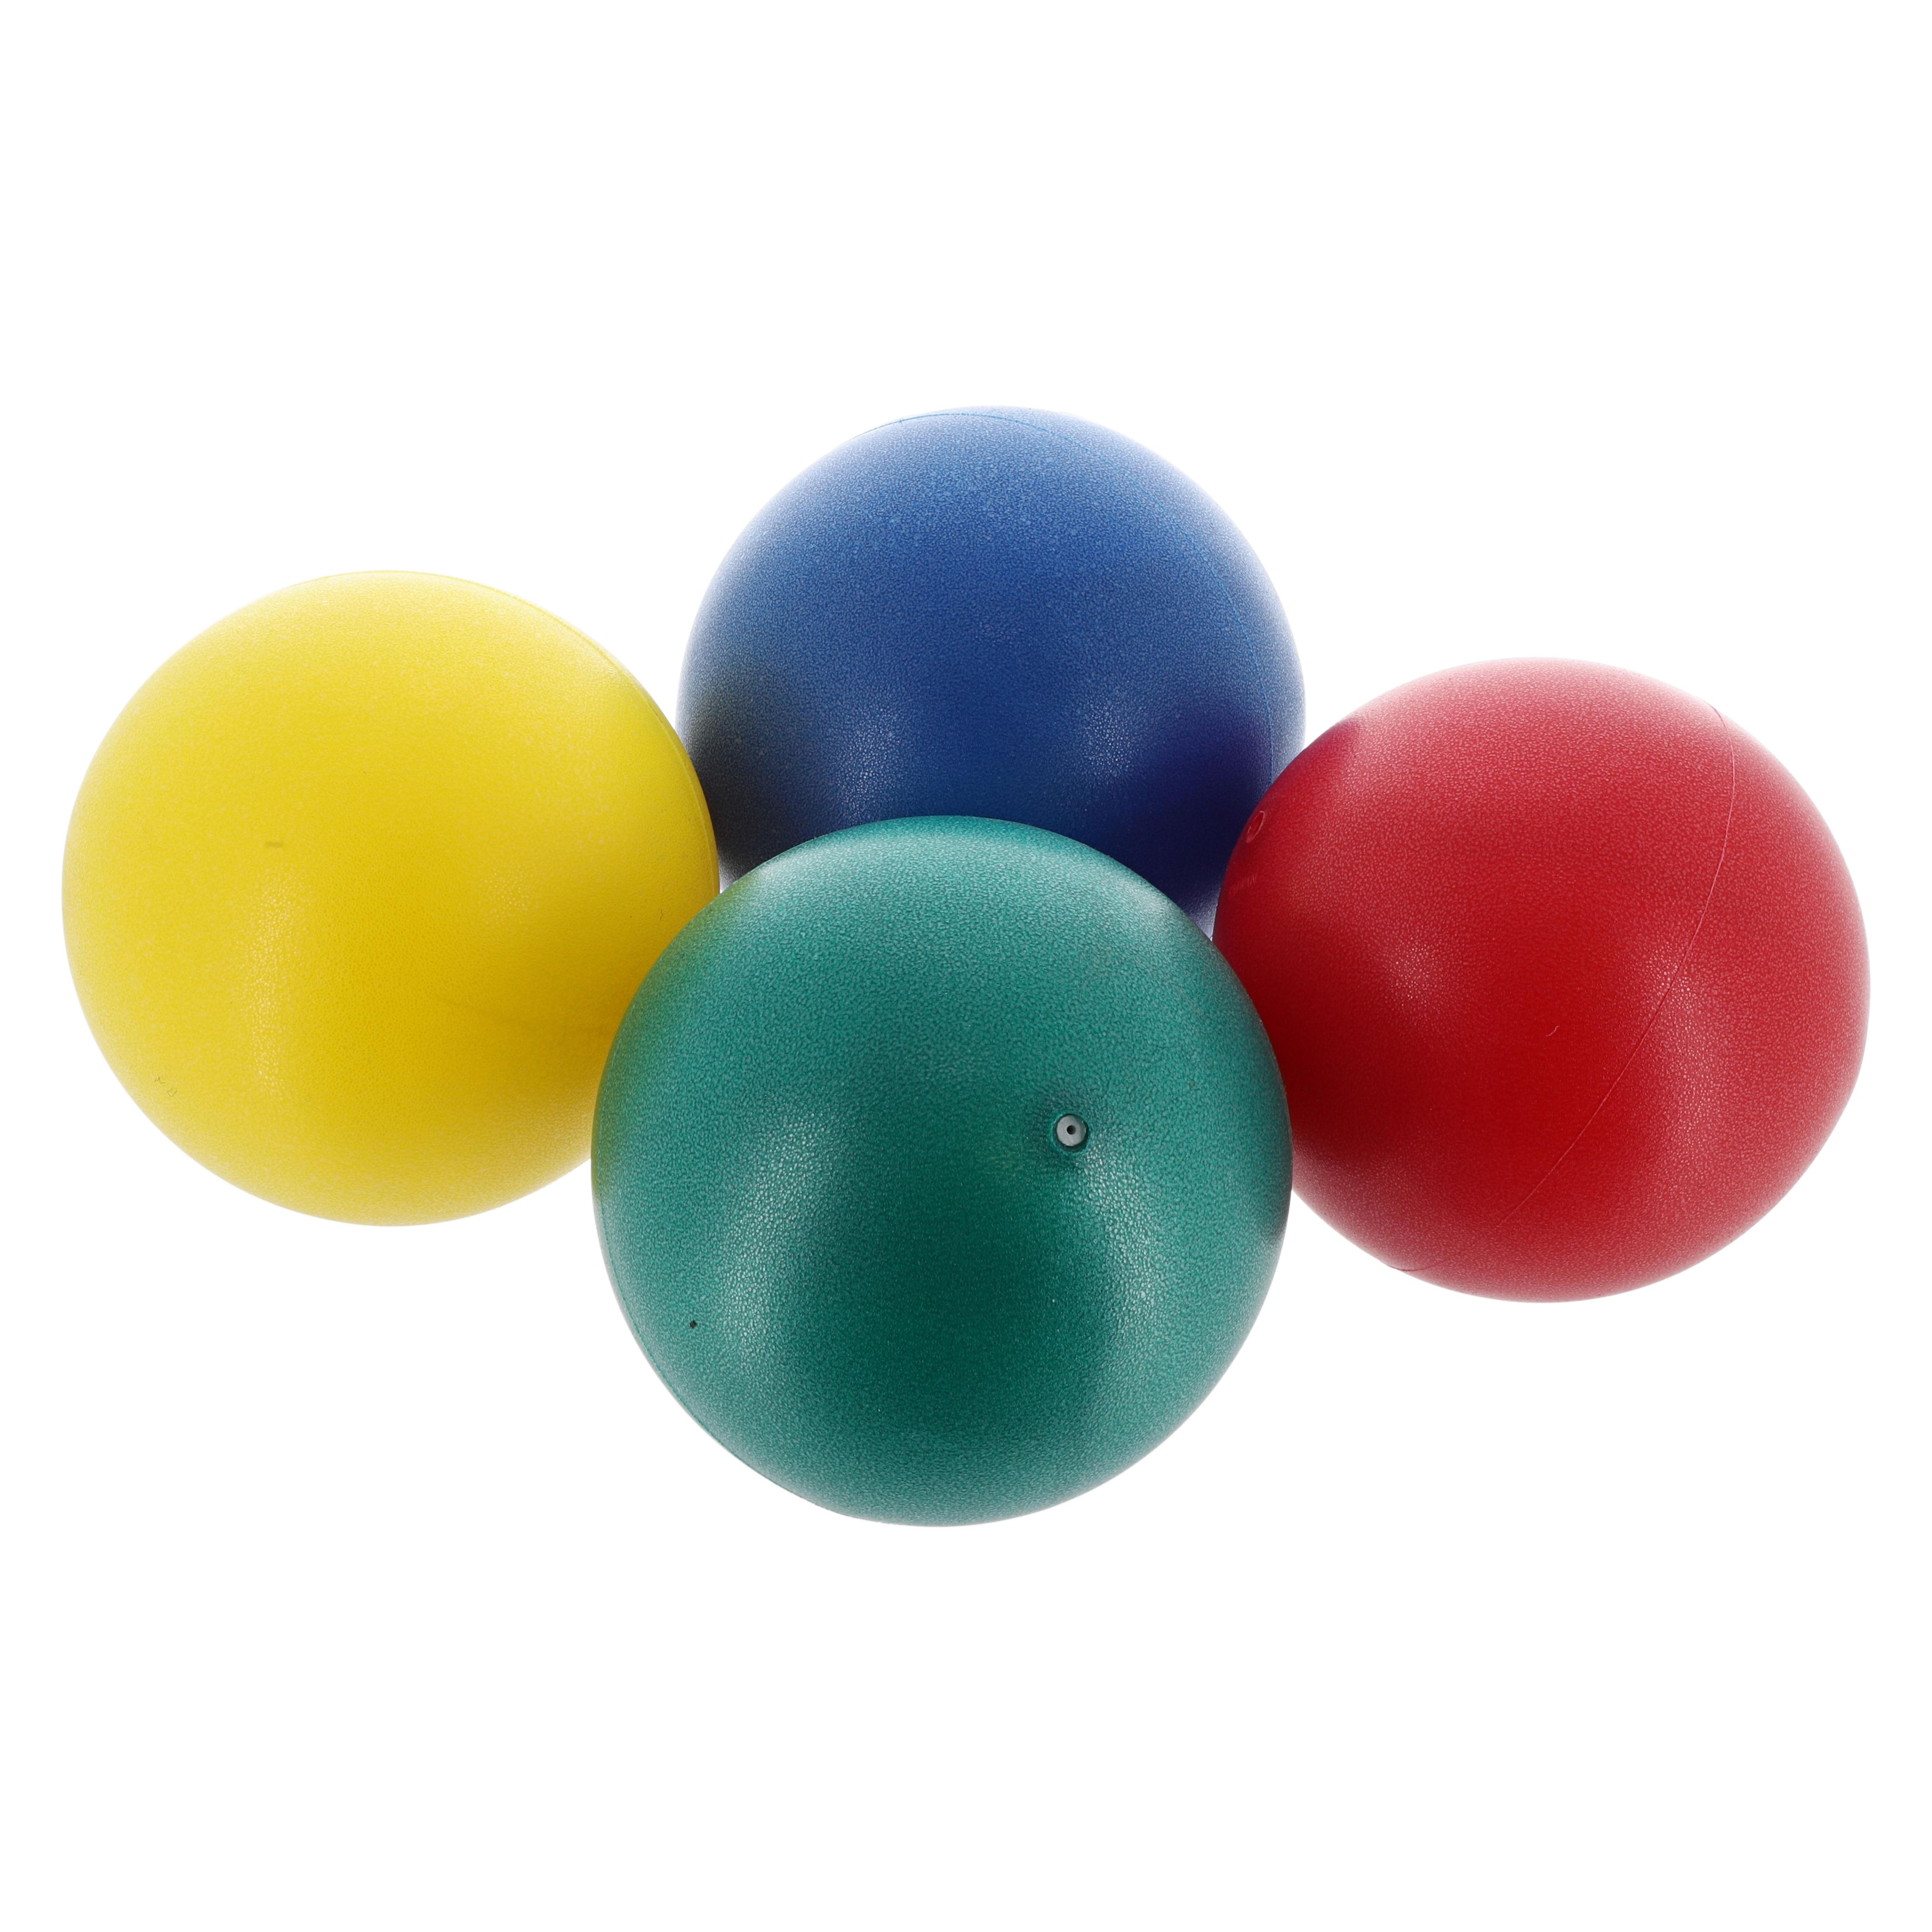 First-play Soft Toouch Balls